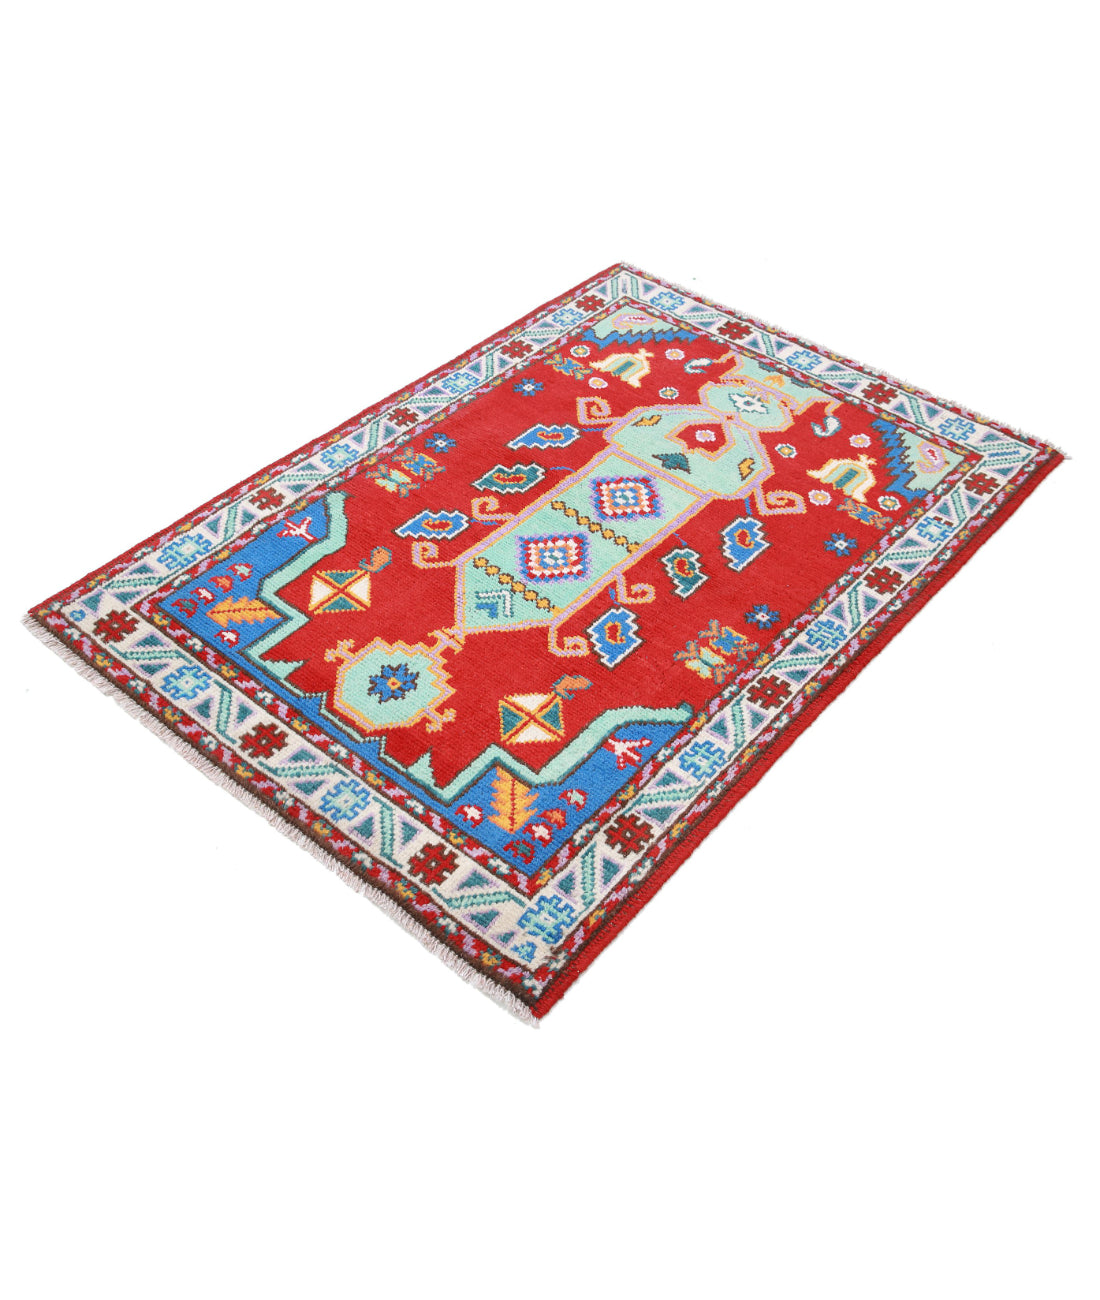 Revival 3'4'' X 4'10'' Hand-Knotted Wool Rug 3'4'' x 4'10'' (100 X 145) / Red / Ivory